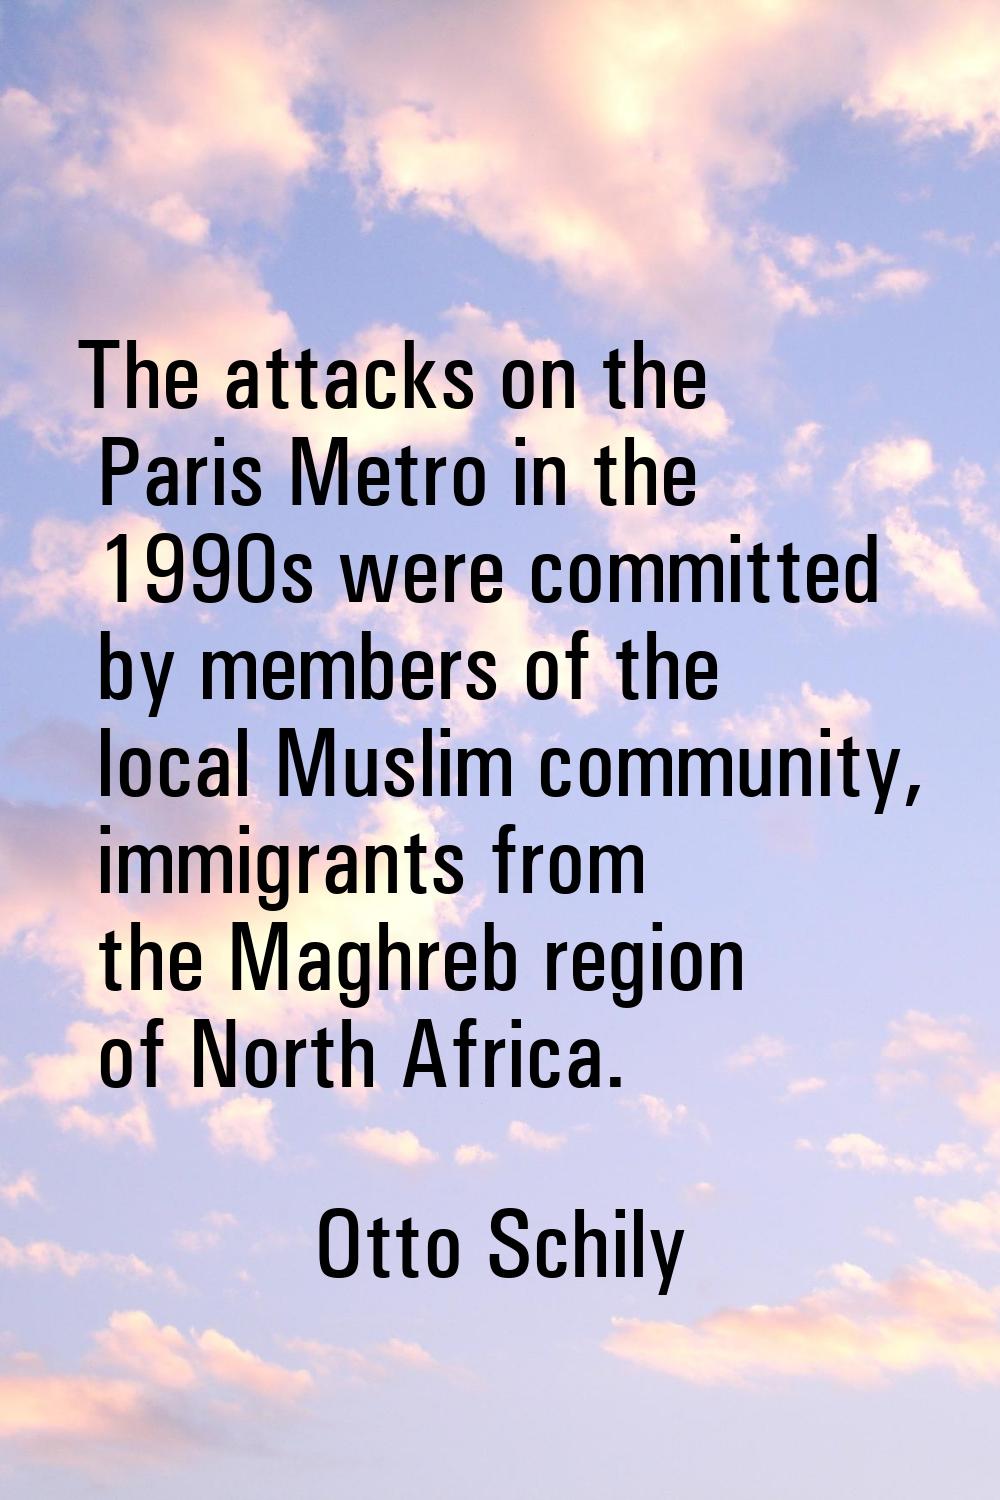 The attacks on the Paris Metro in the 1990s were committed by members of the local Muslim community